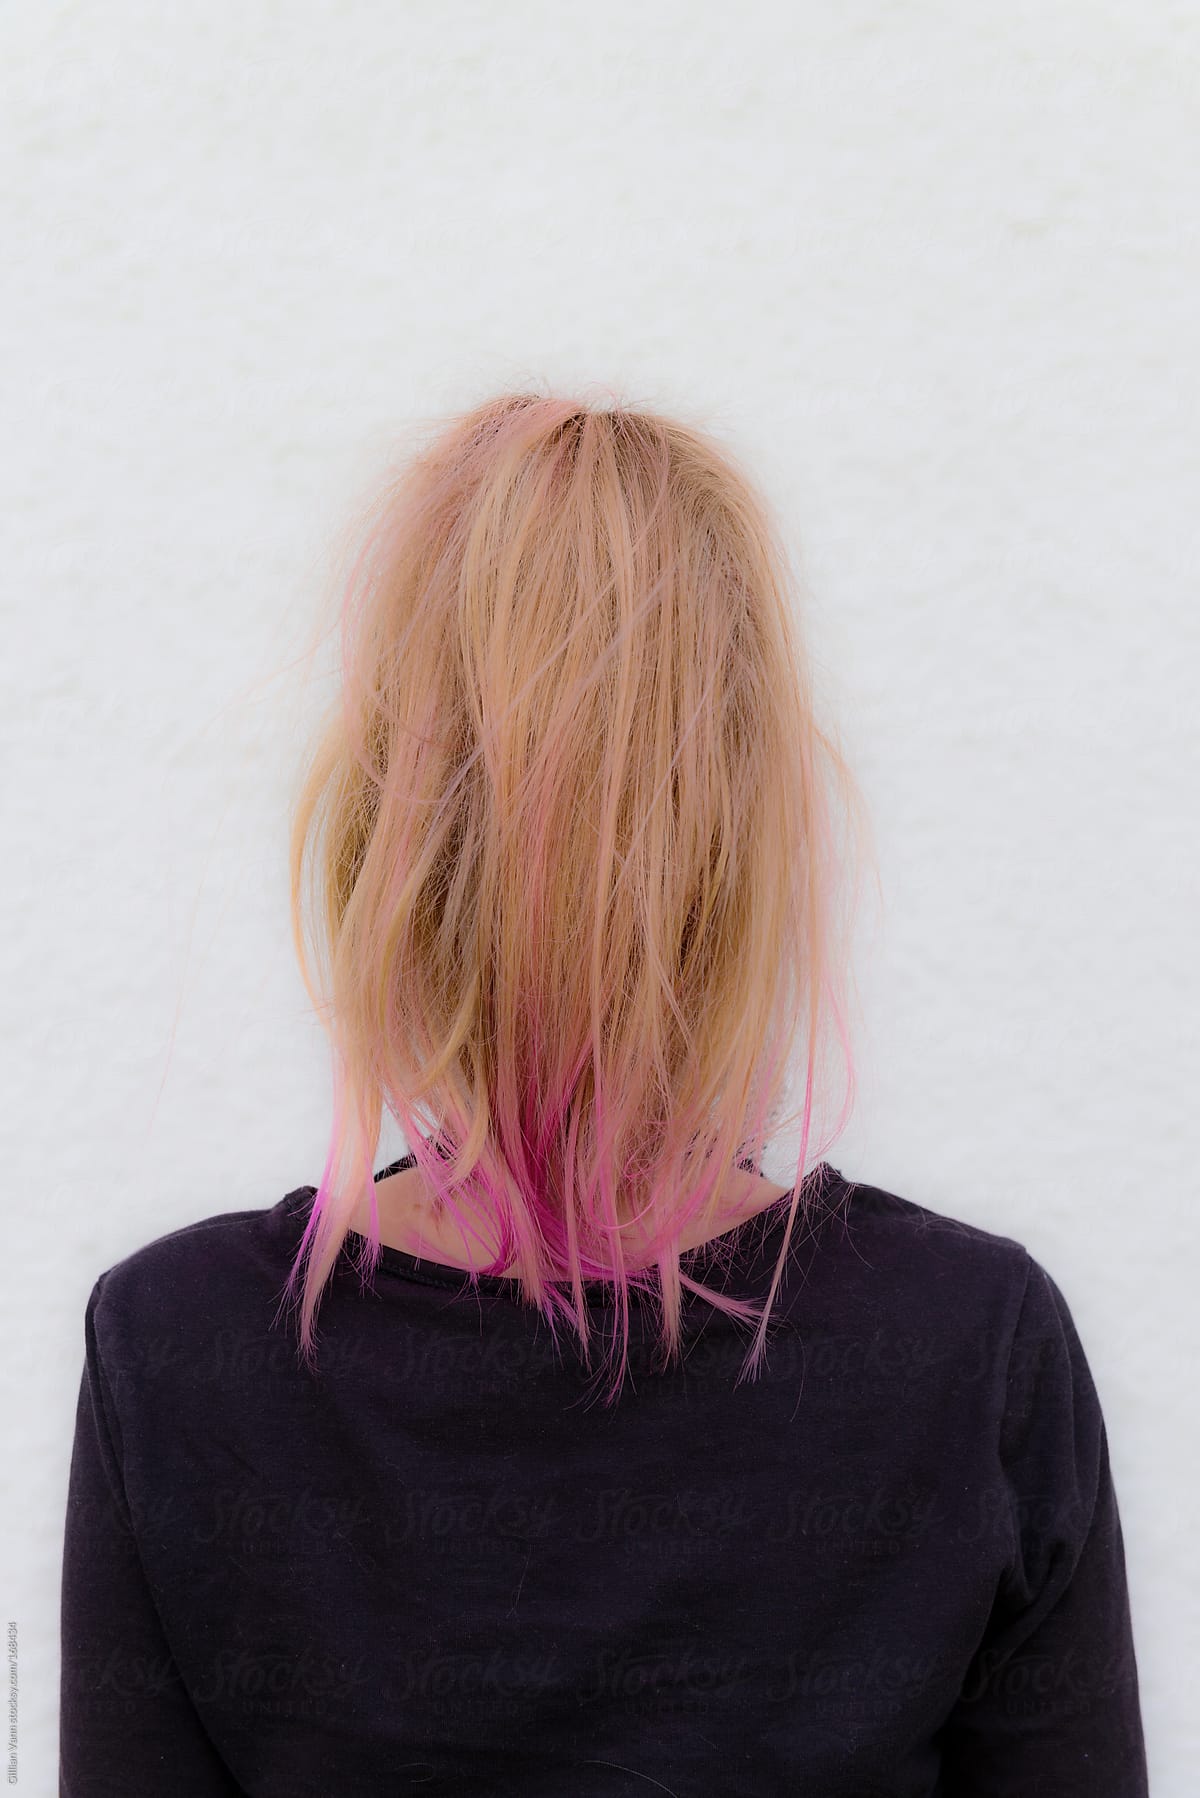 Blonde Hair With Pink Ends By Gillian Vann Stocksy United